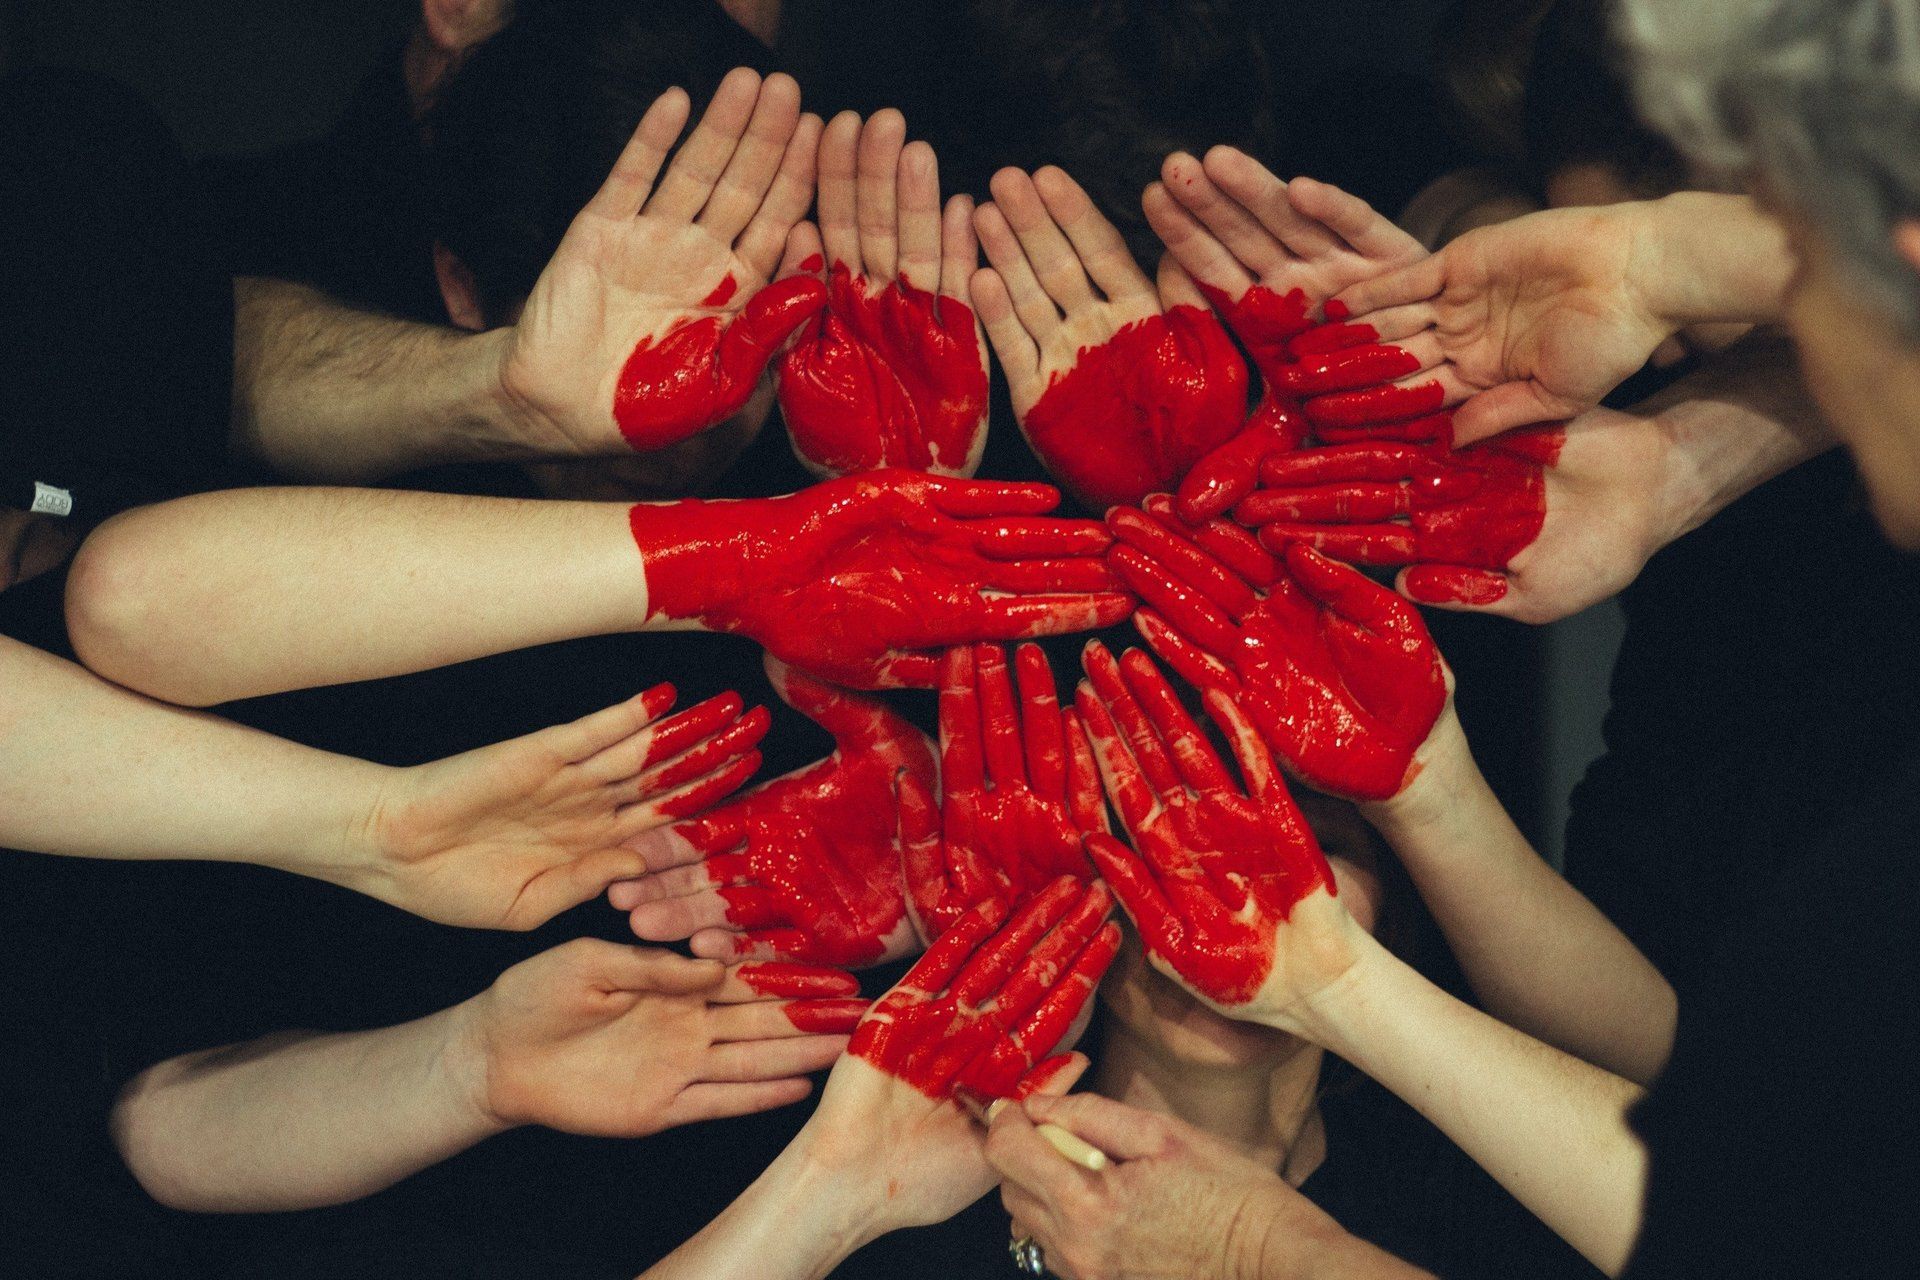 A group of human hands forming a heart shape